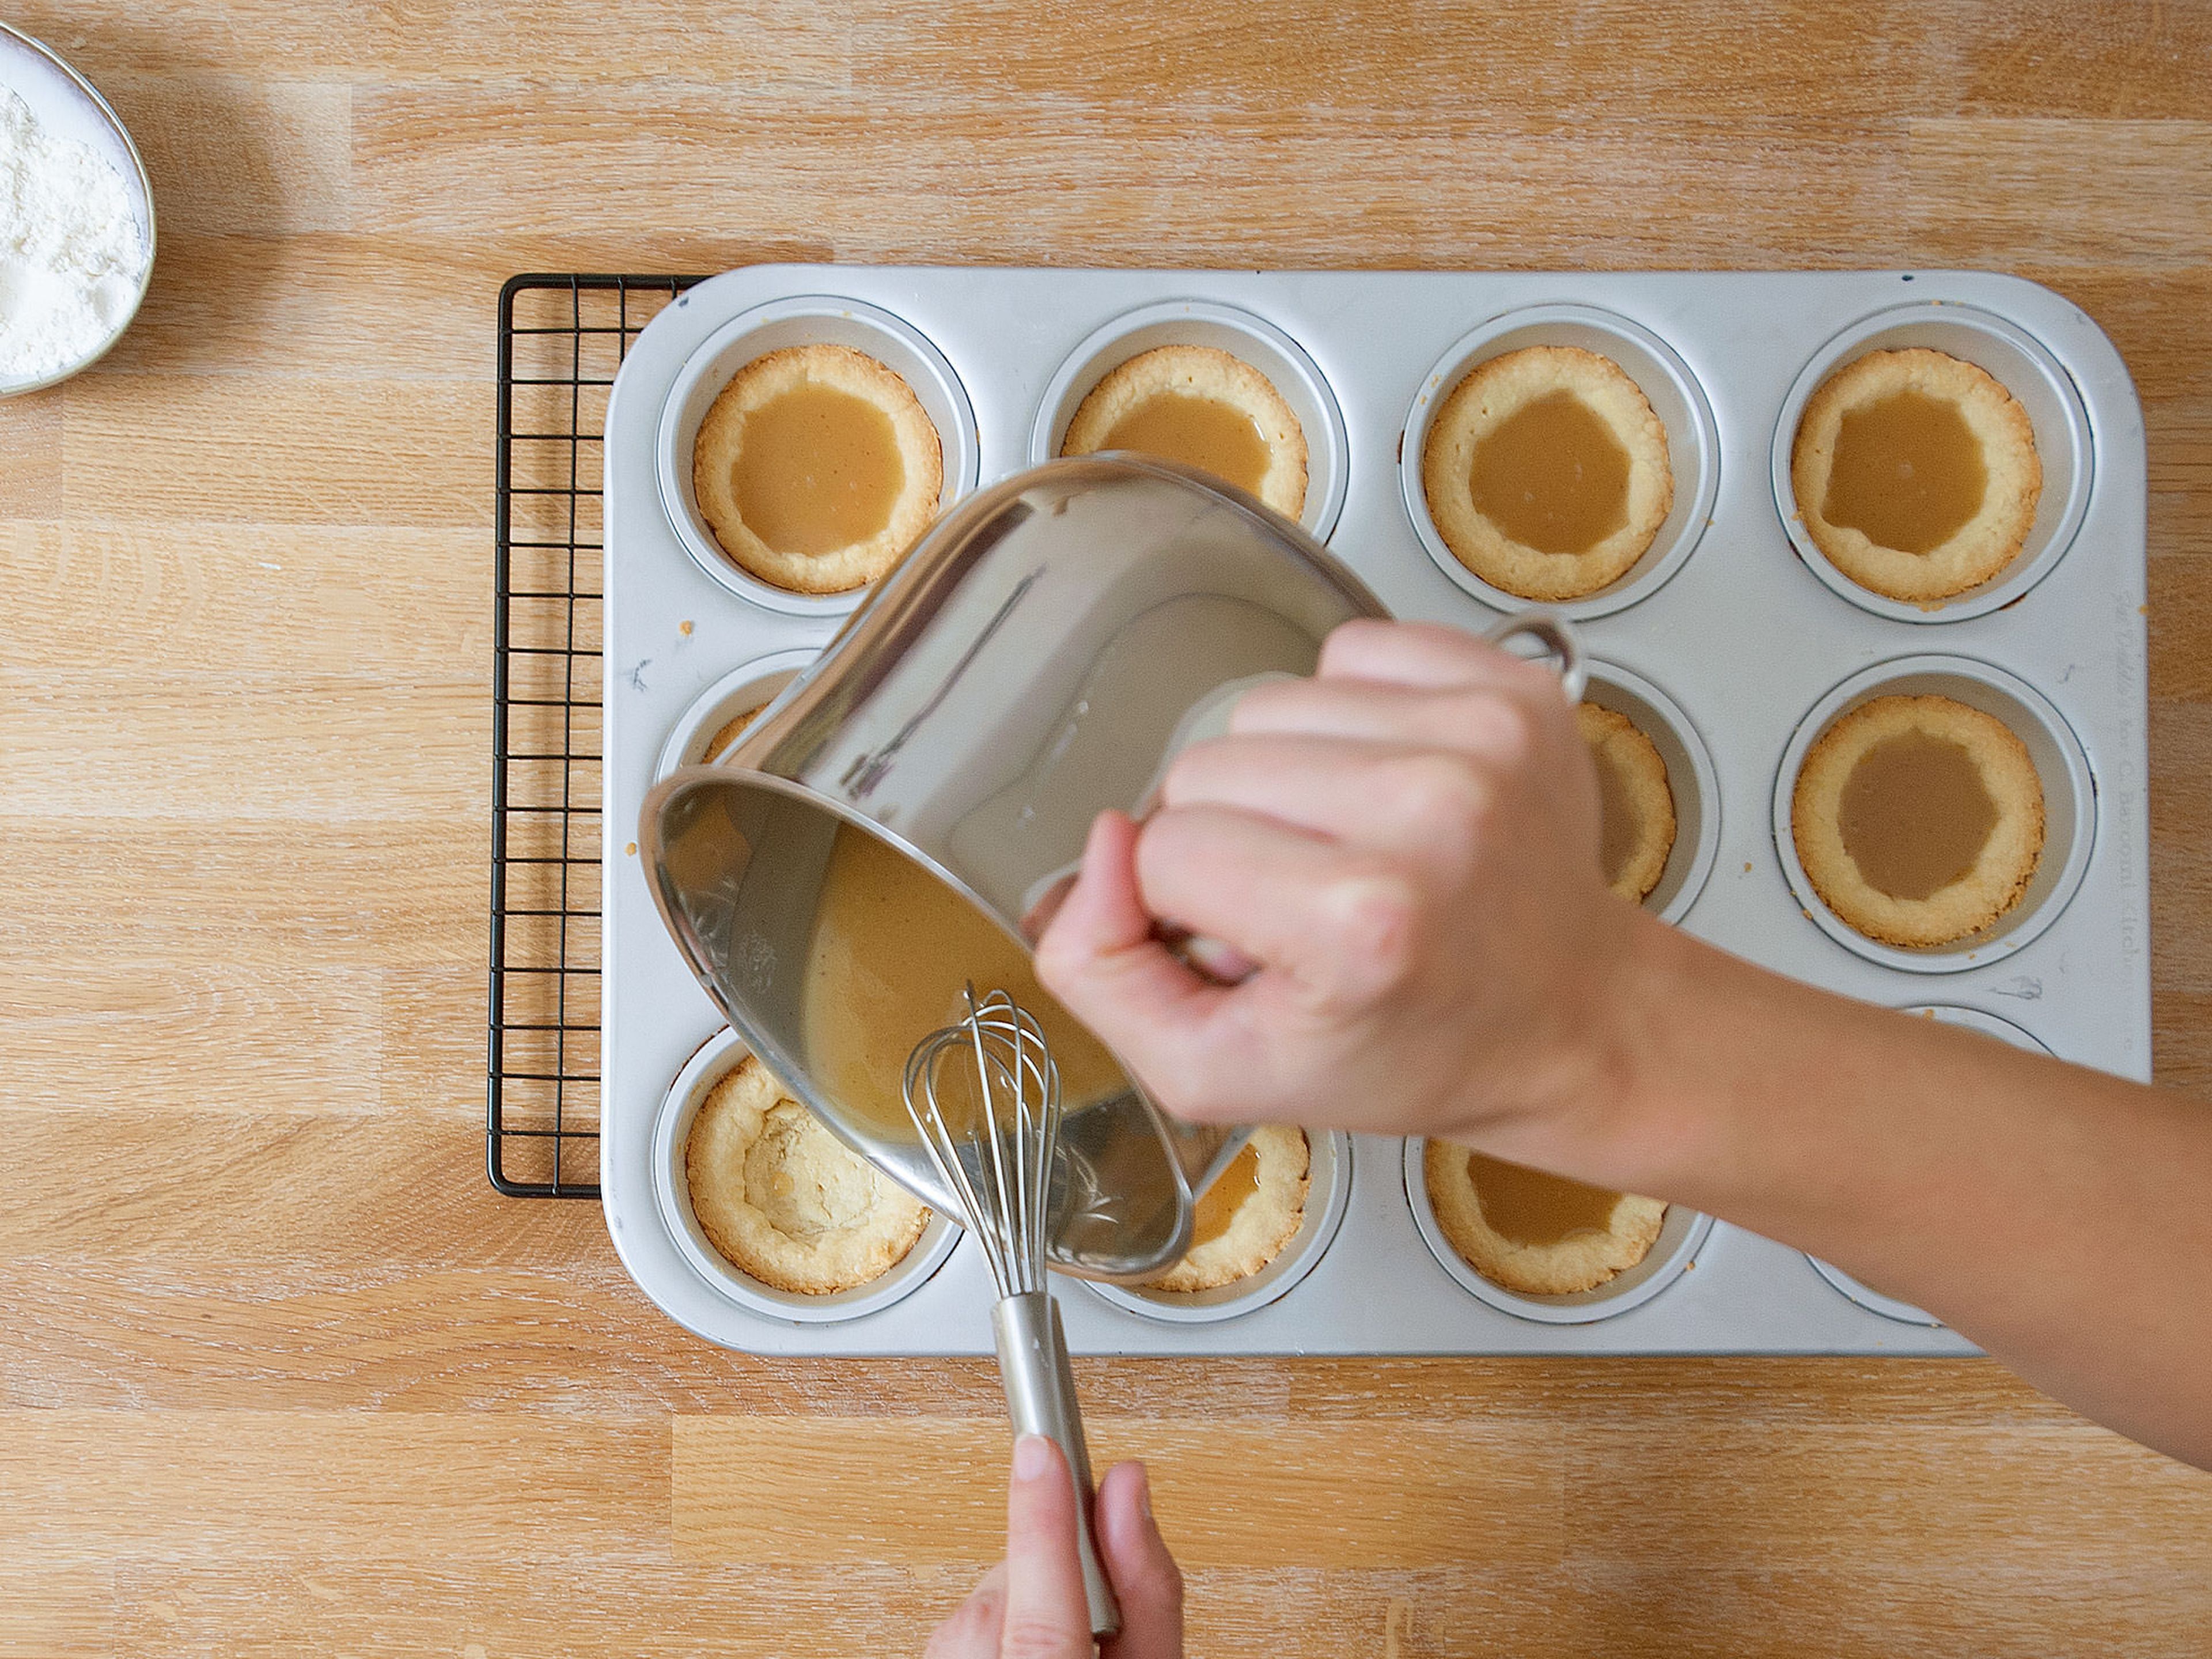 Pour caramel into each muffin cup and bake for approx. 6 – 8 min., then set aside to cool.